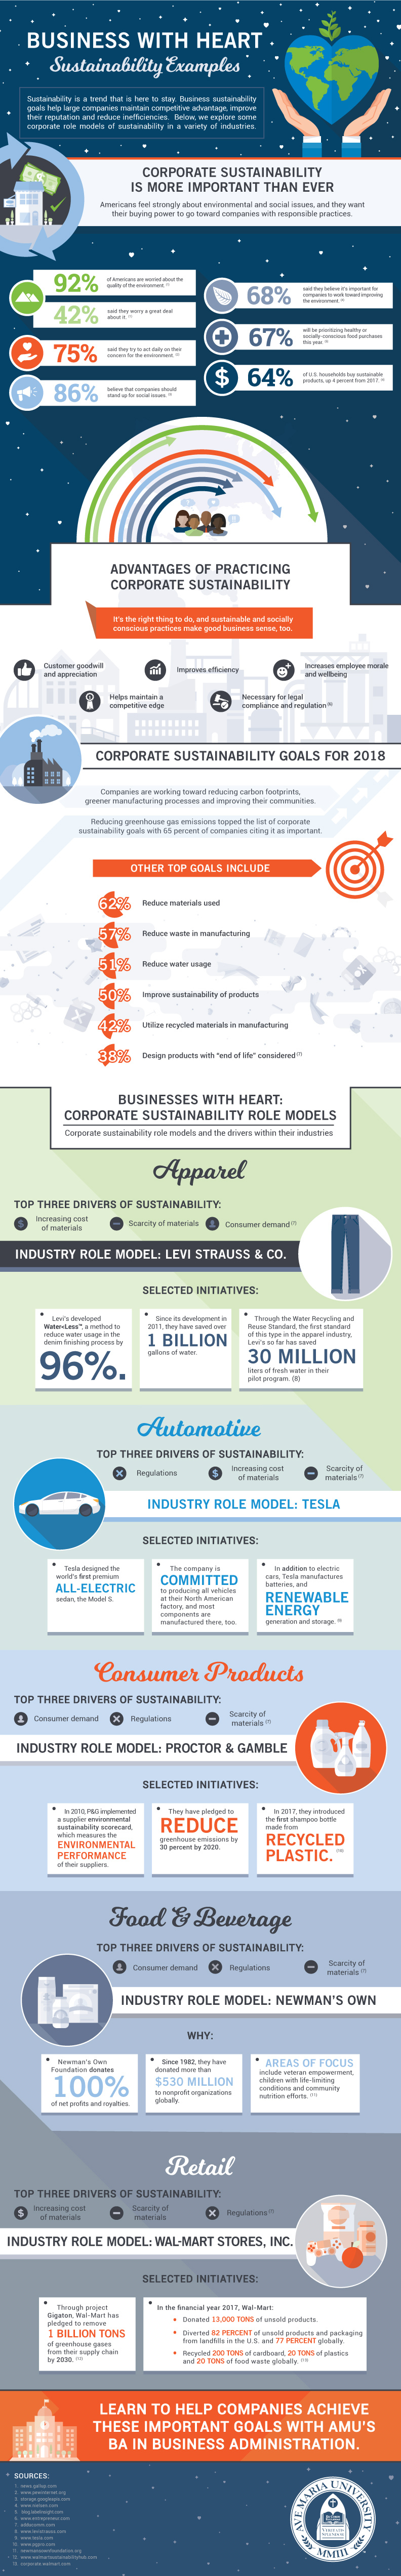 Illustrated infographic of sustainability practices in business with statistics and specific corporate examples.